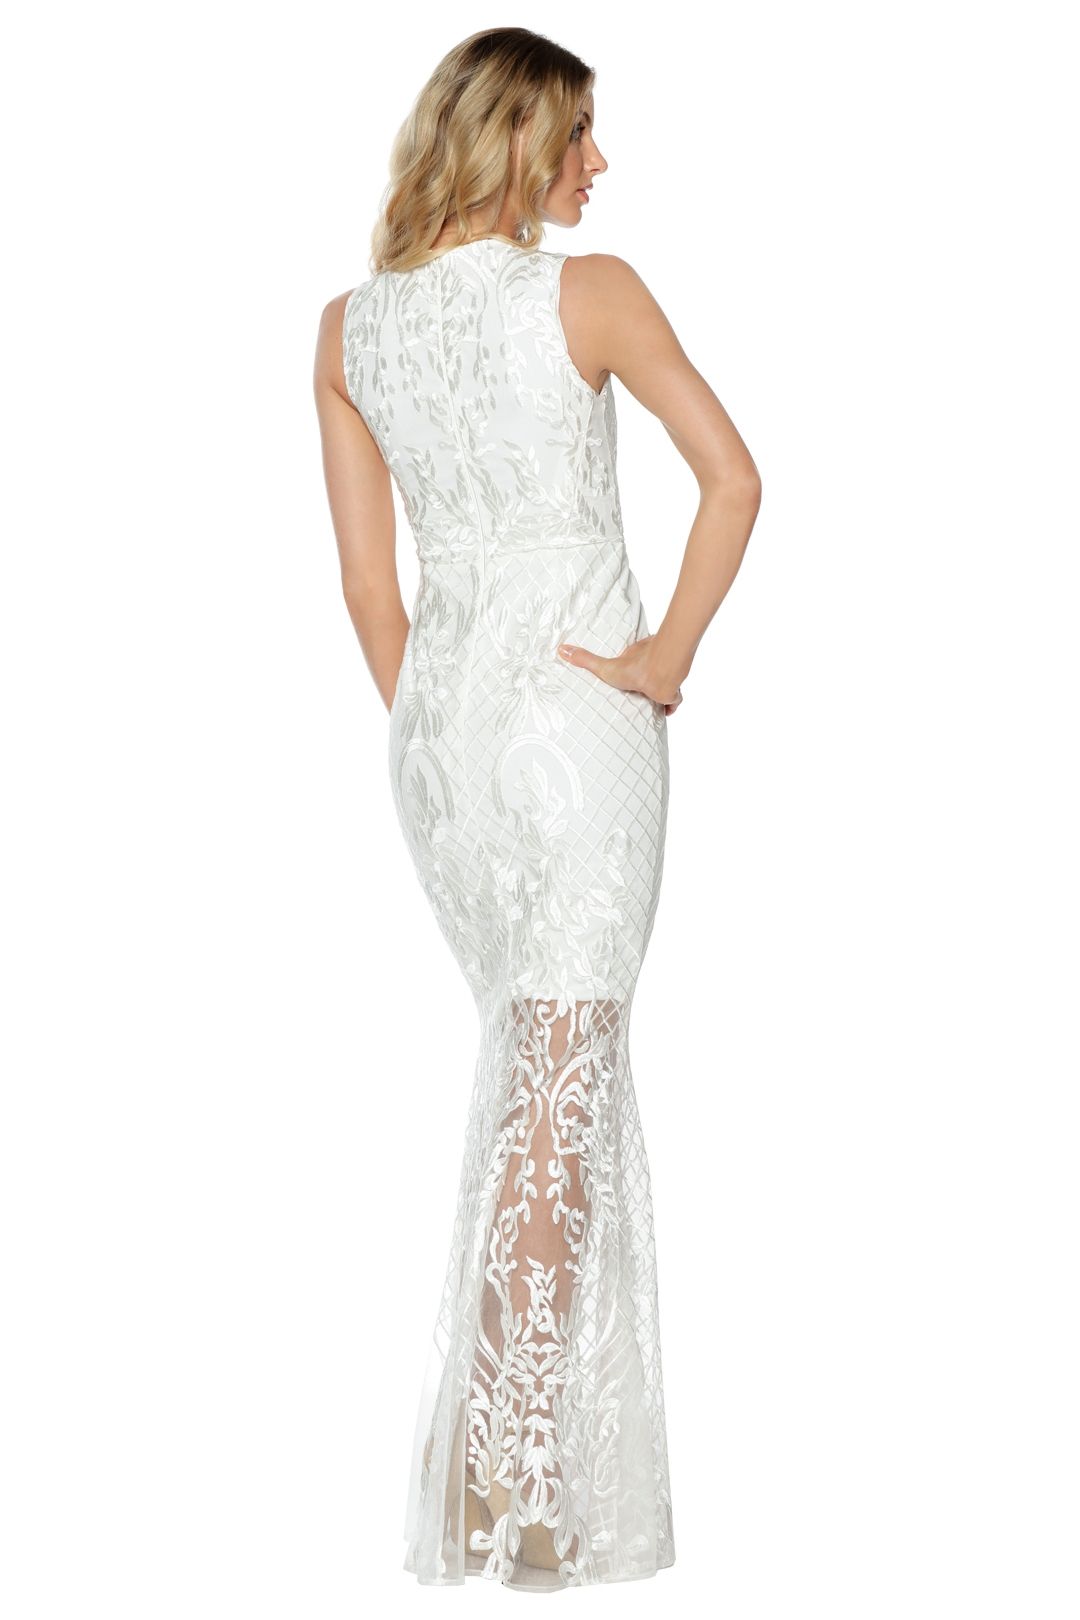 Grace and Hart - Ignite Passion Gown - White - Back